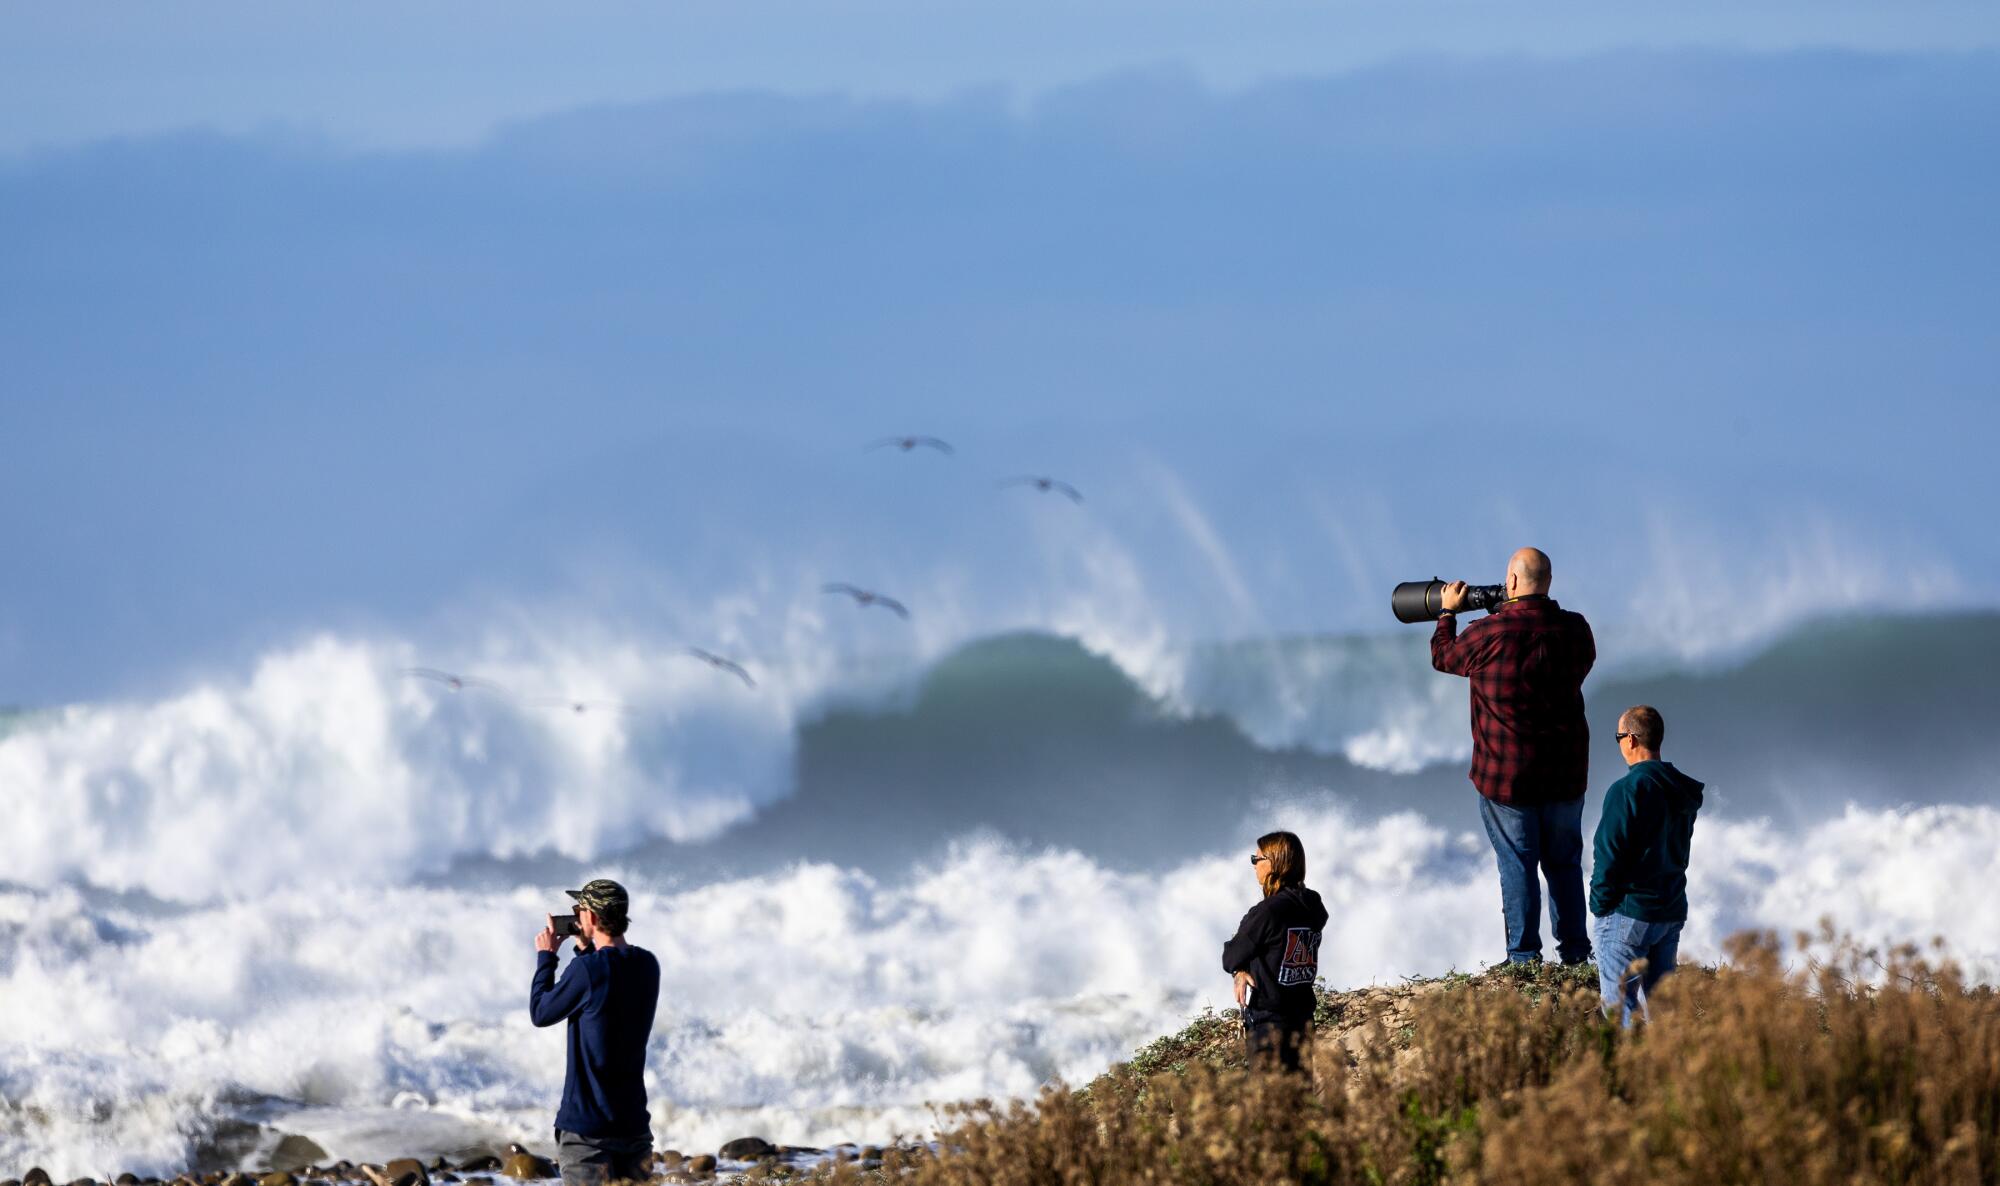 Photographers at Surfer's Point in Ventura.